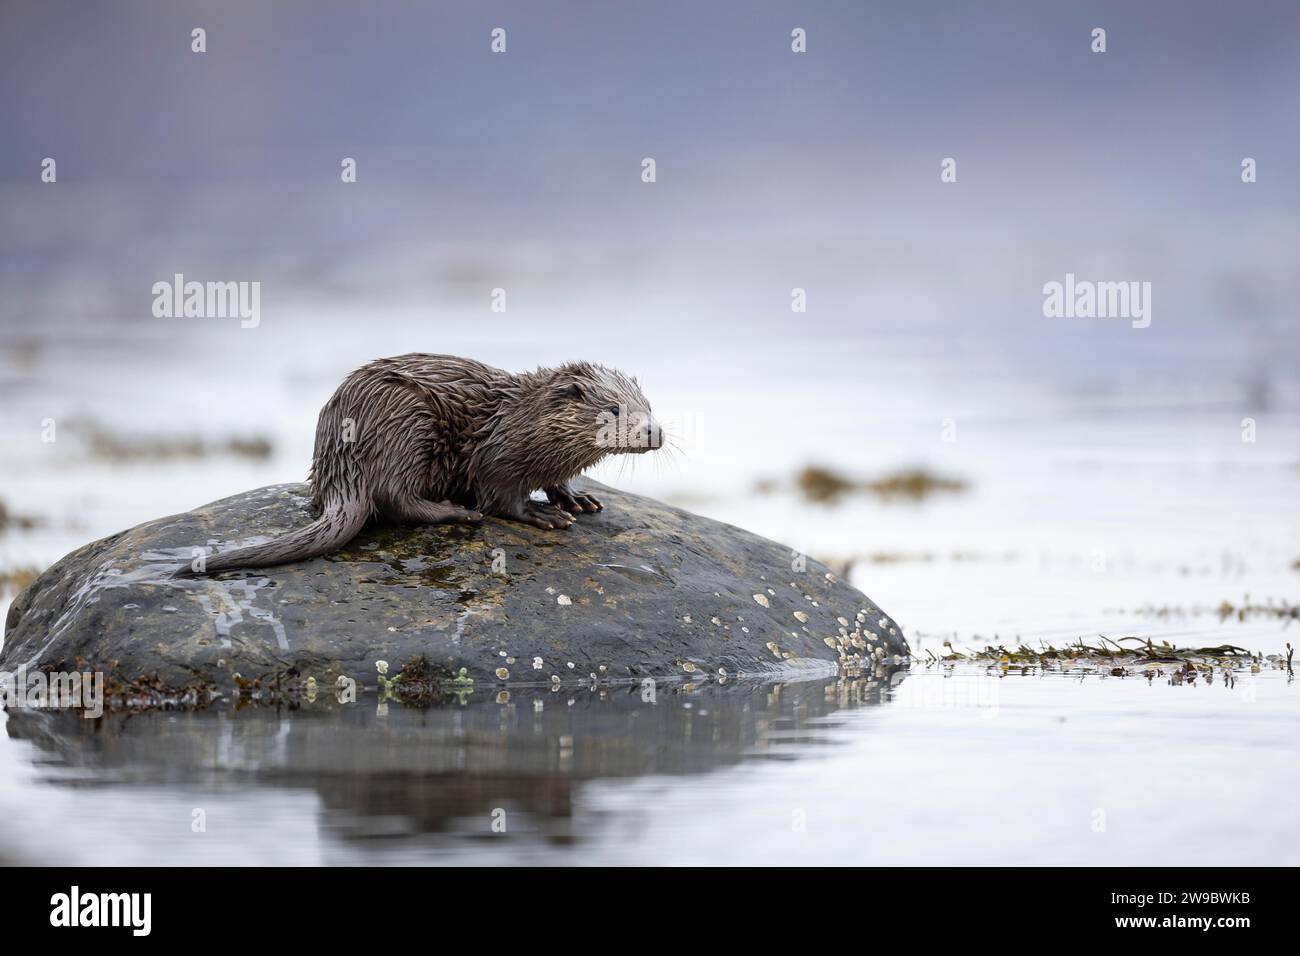 Young European otter (Lutra lutra) sitting on a rock in a Scottish Loch Stock Photo